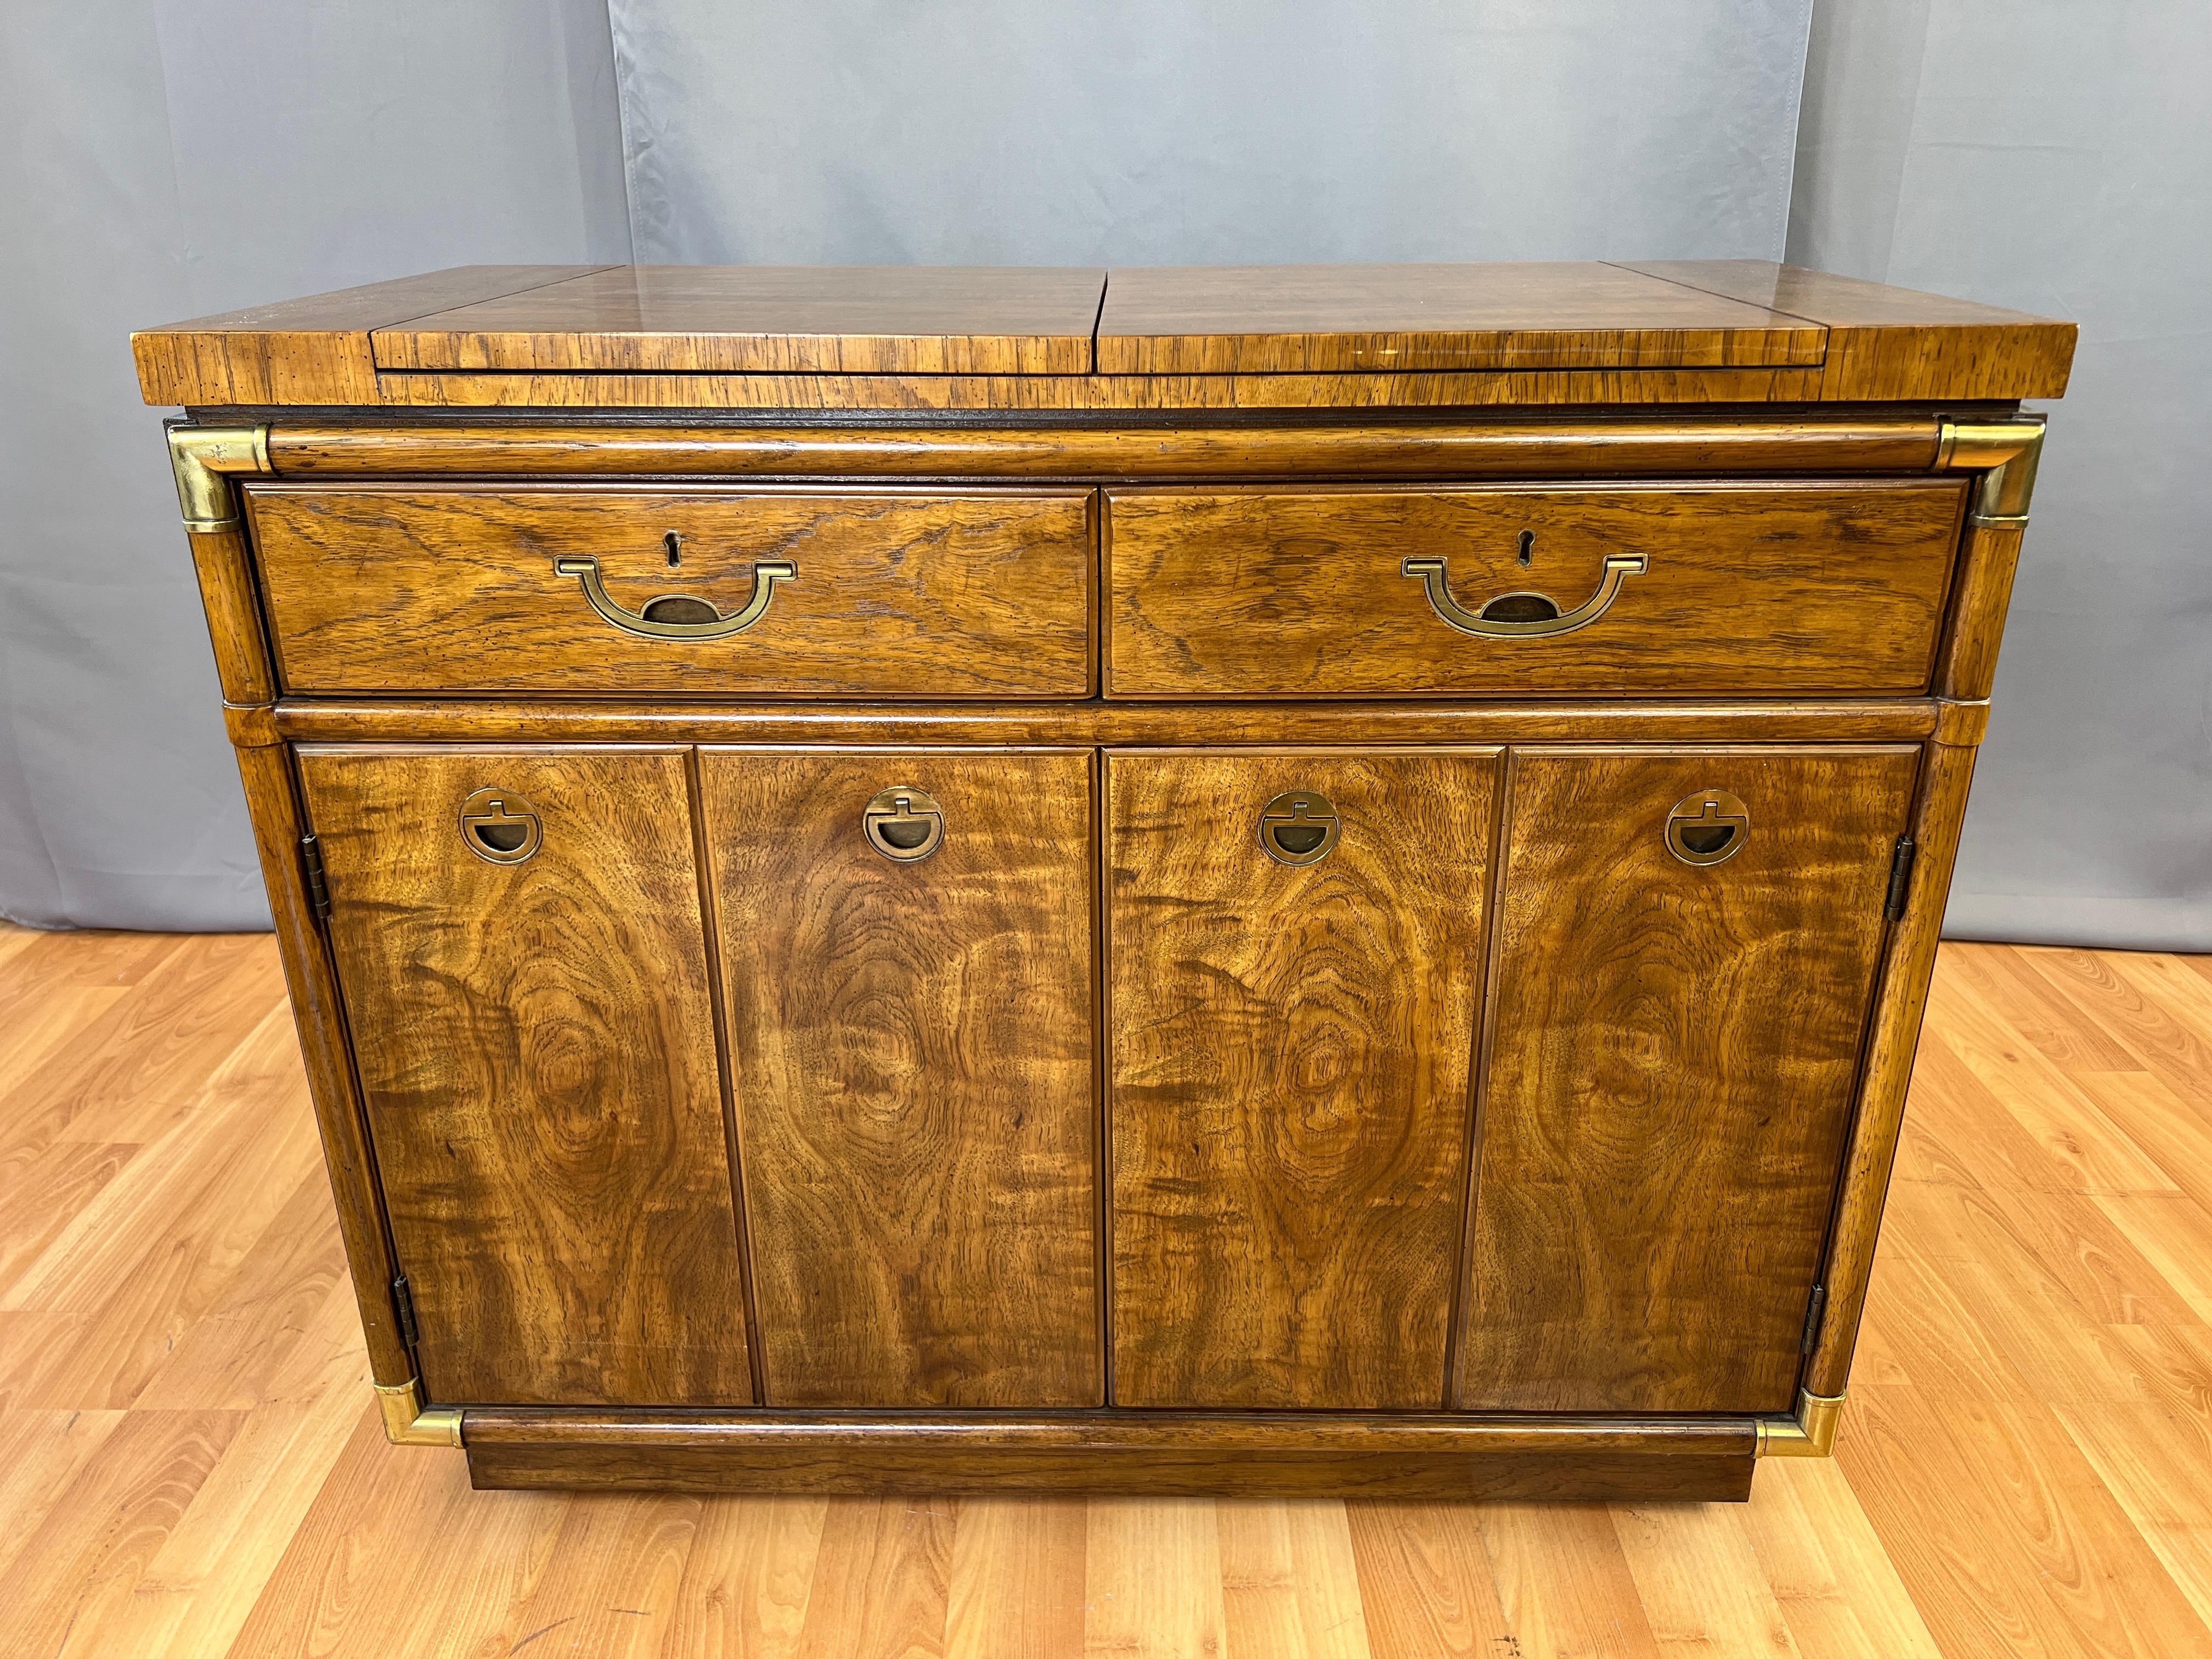 A 1970s campaign-style flip-top rolling dry bar or cabinet from Drexel’s Accolade II collection.

A super handsome piece dressed top-to-bottom and front-to-back in absolutely gorgeous matched flared grain wood (believed to be pecan or something